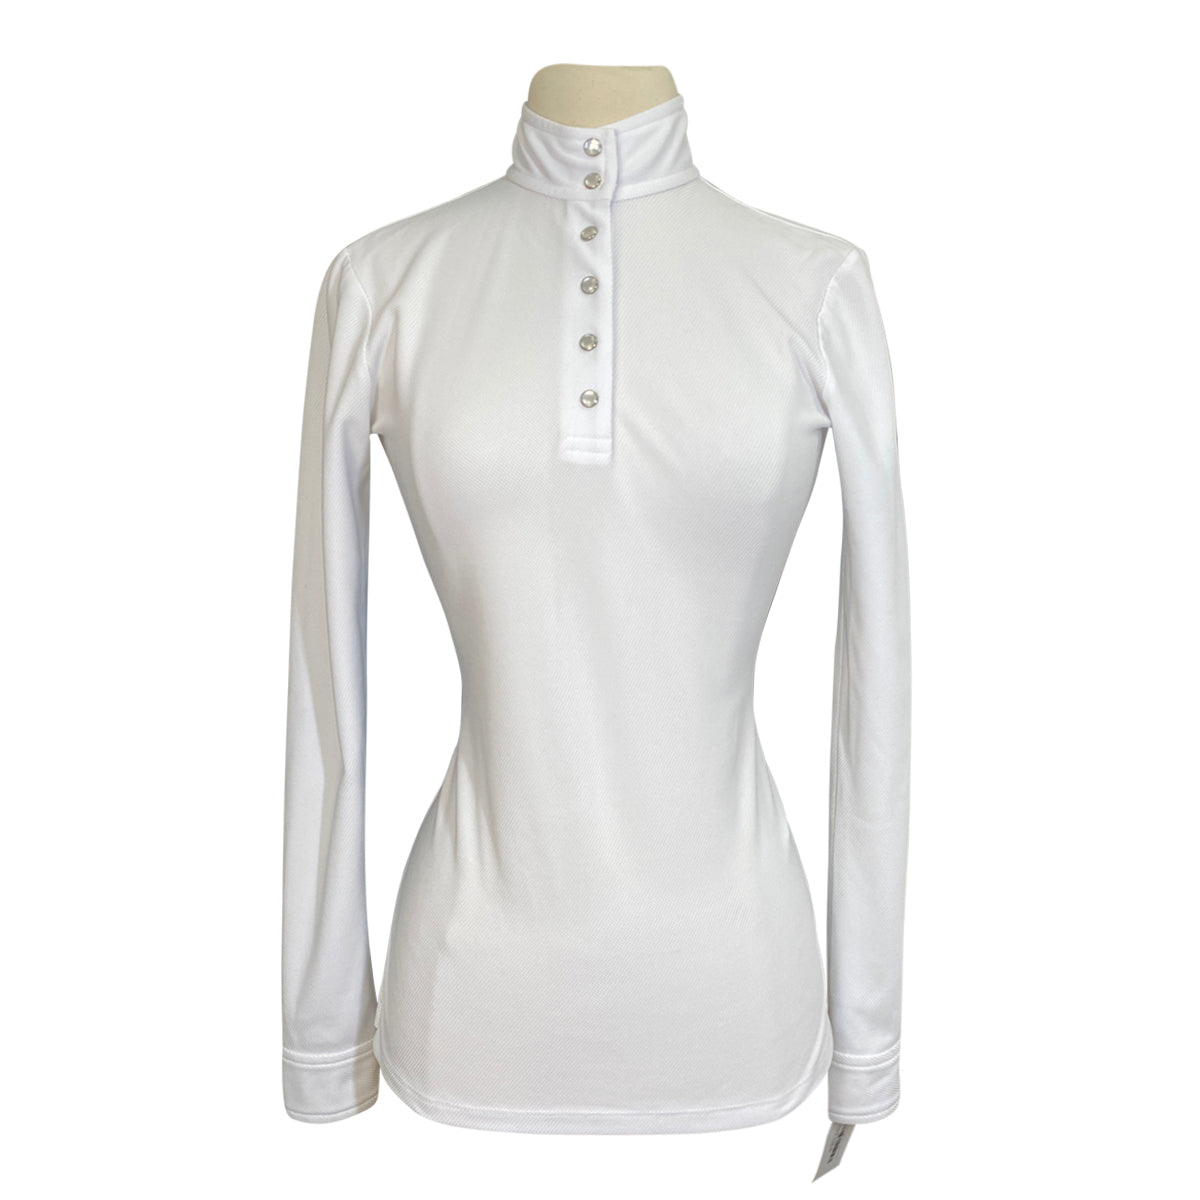 Èce Equestrian Long Sleeve Show Shirt in White/Lavender